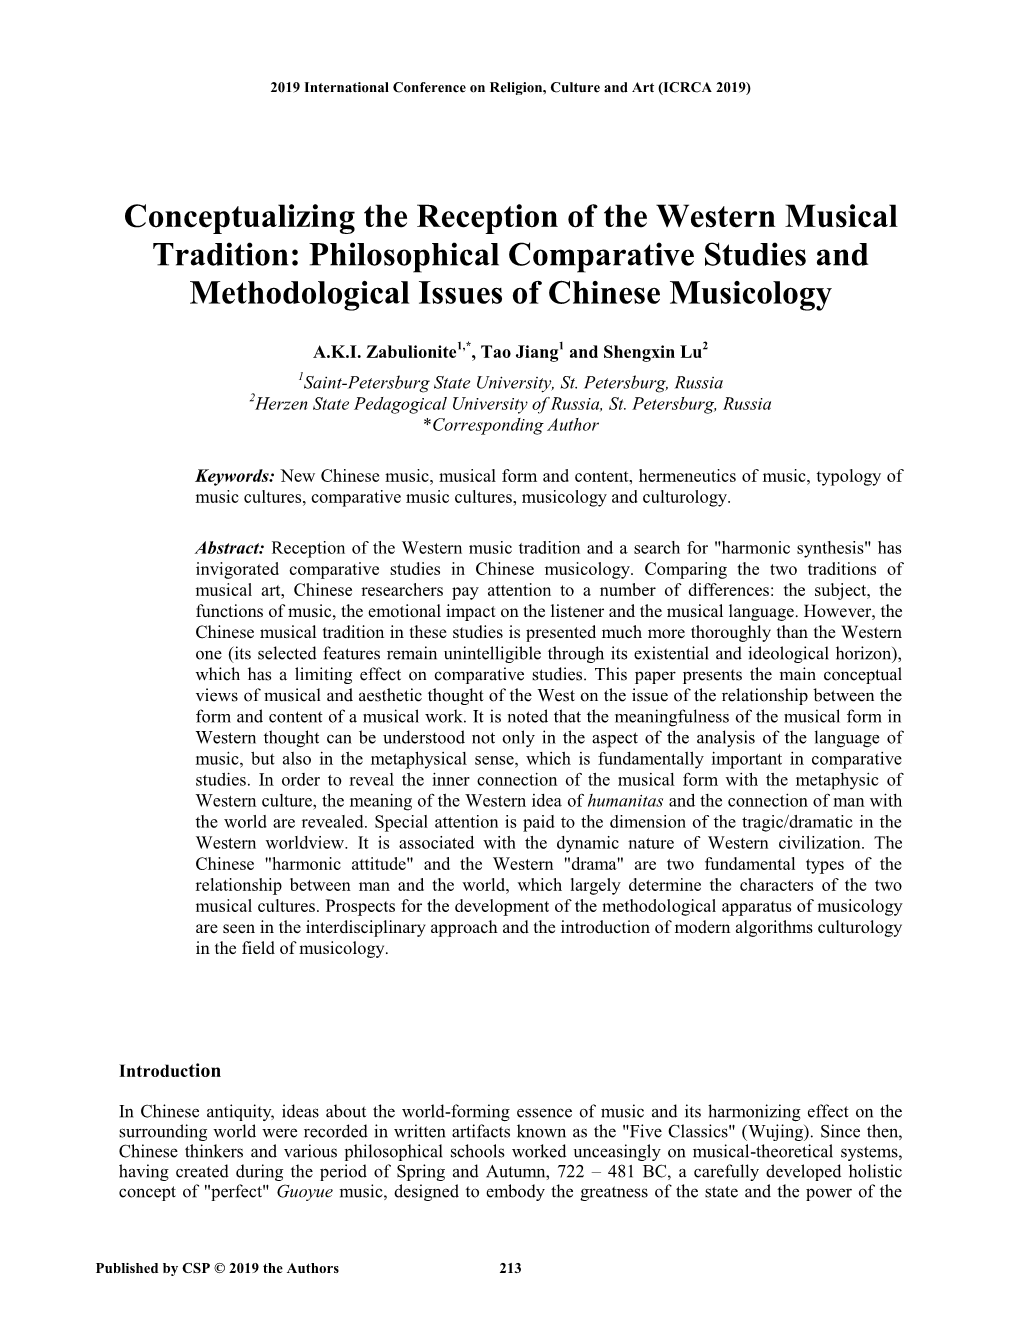 Conceptualizing the Reception of the Western Musical Tradition: Philosophical Comparative Studies and Methodological Issues of Chinese Musicology